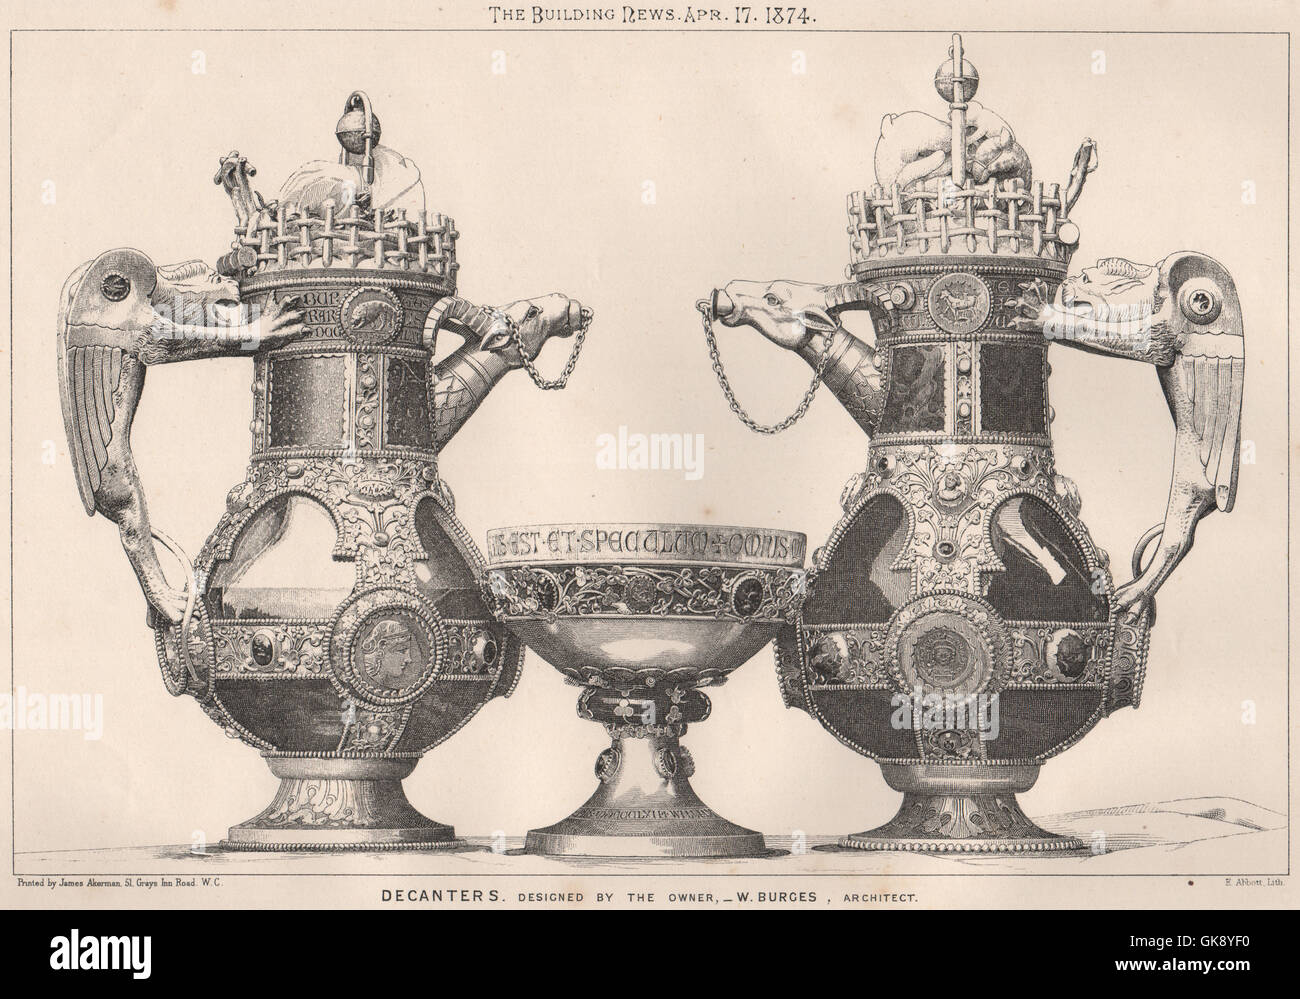 Decanters, designed by the owner - W. Burges, Architect. Design, print 1874 Stock Photo